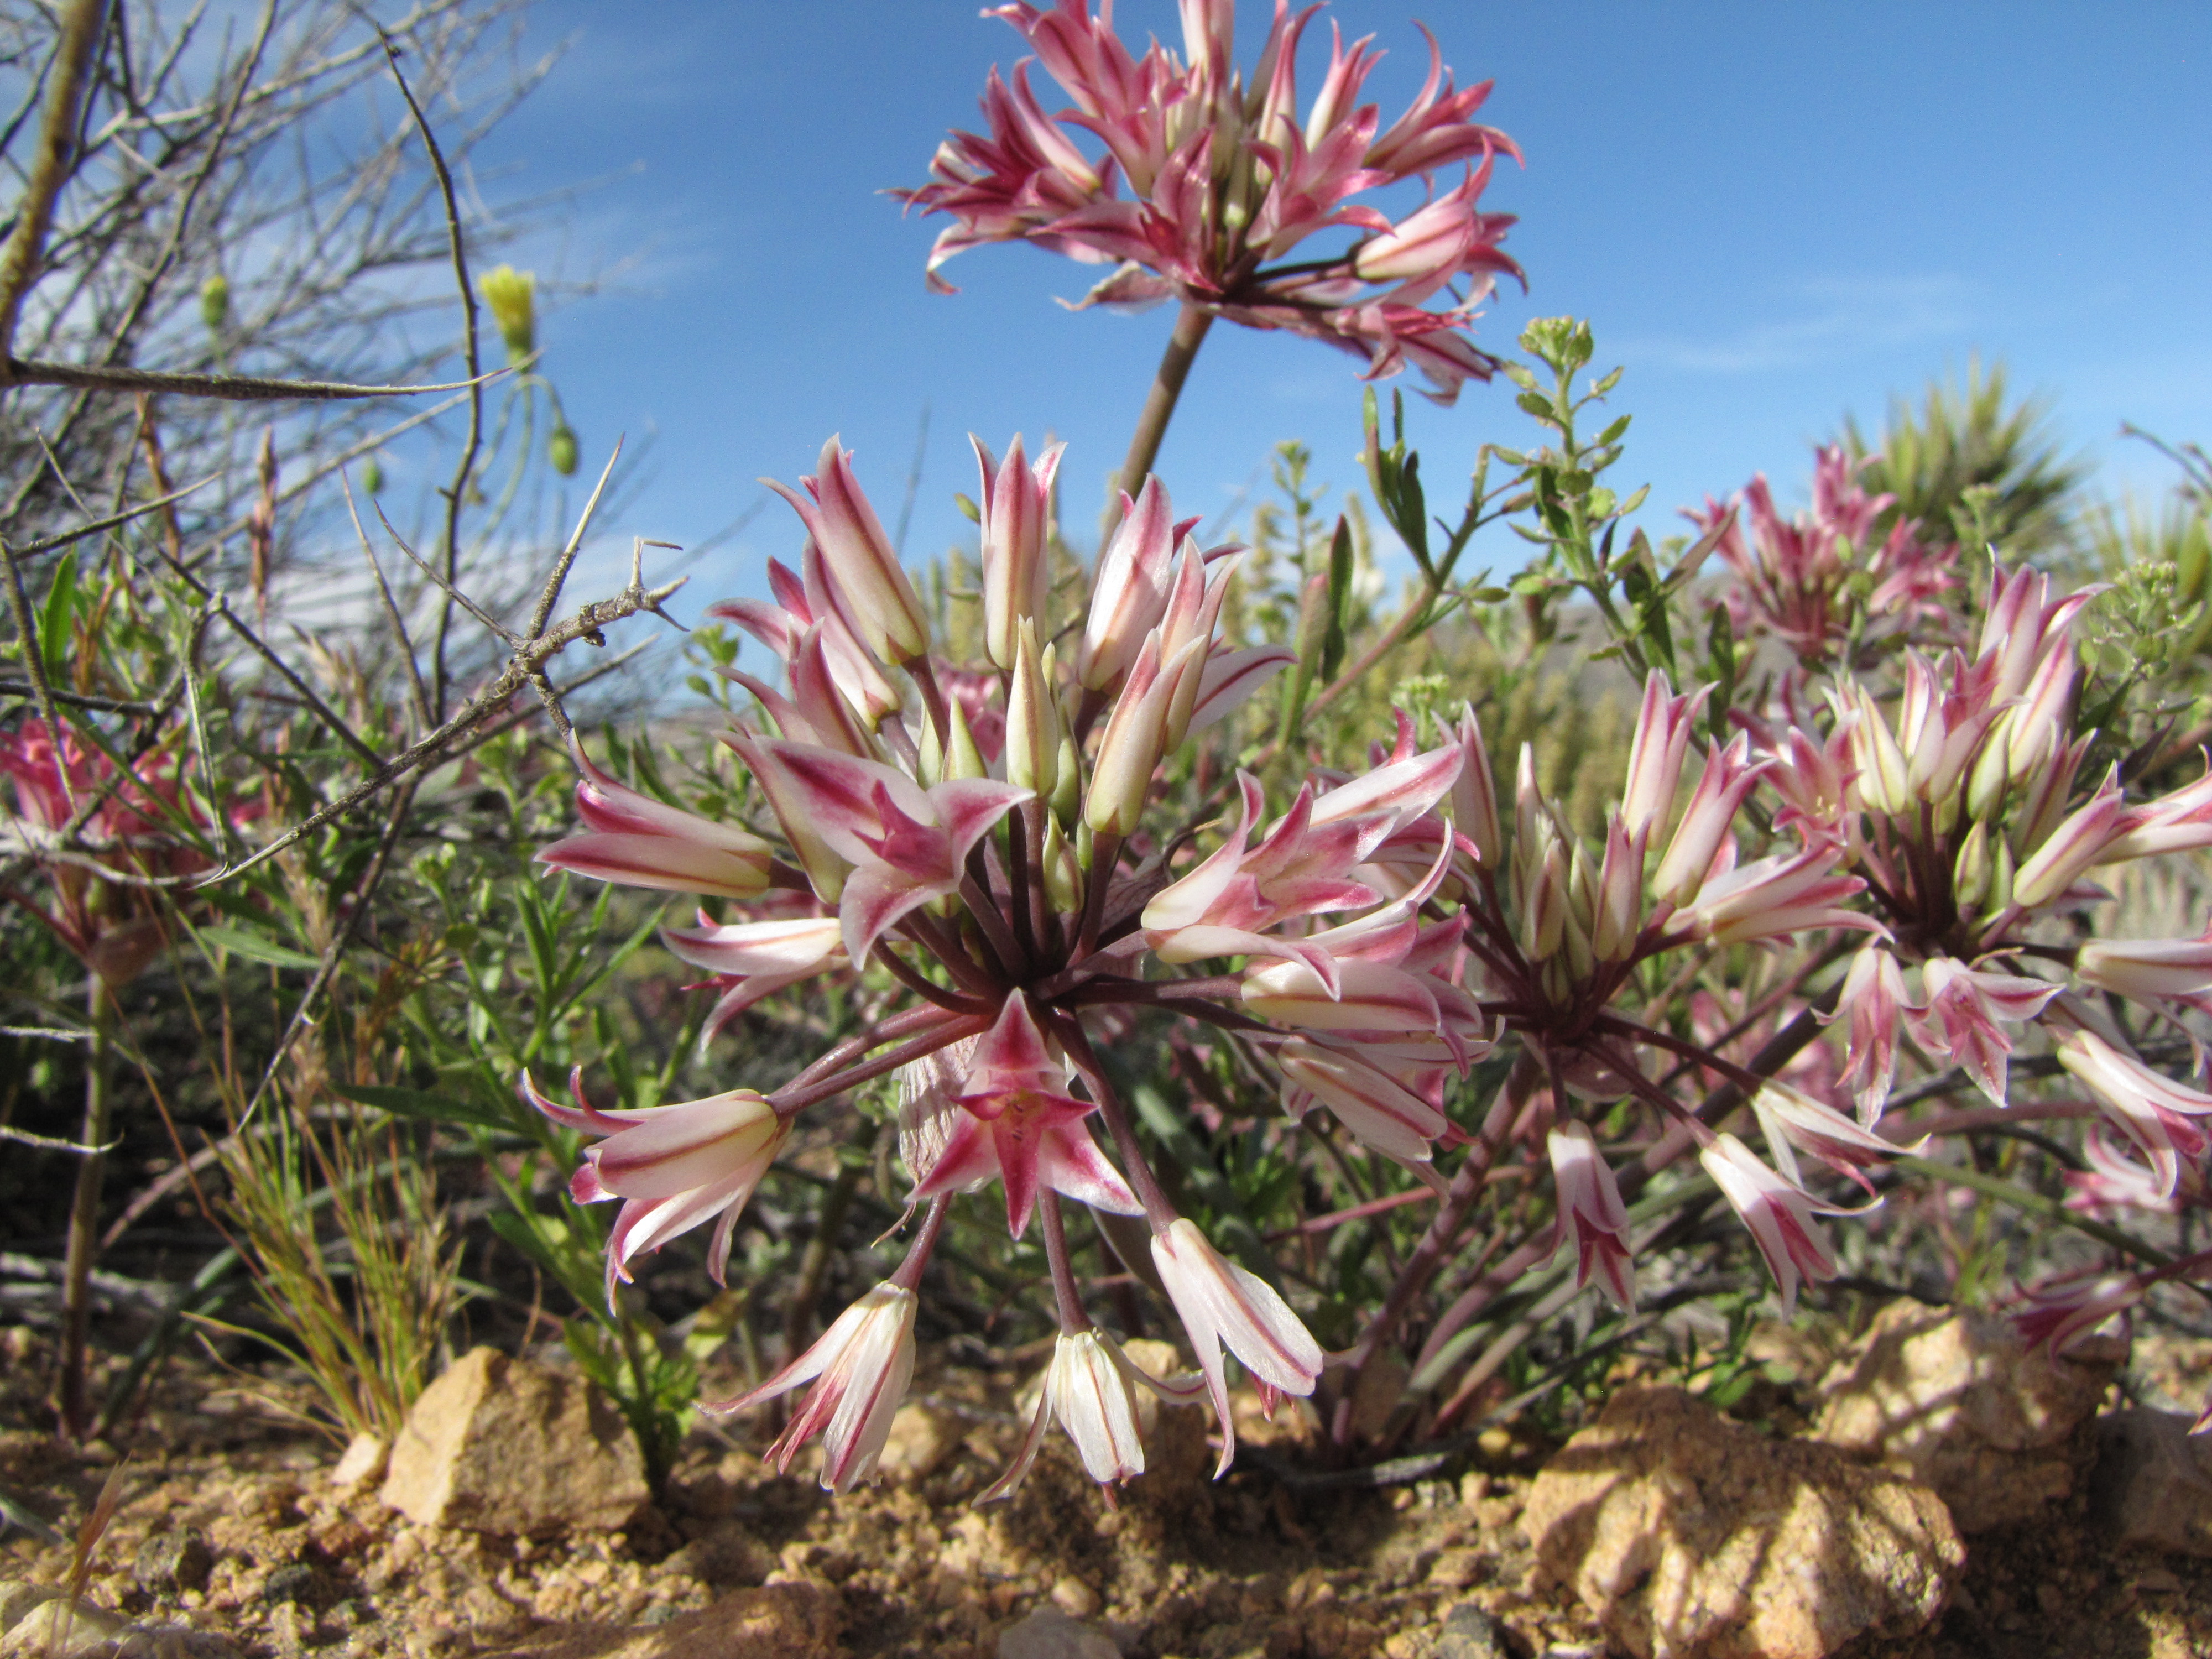 Color photo of pink and white flowers bunched together on the top of a long stalk.